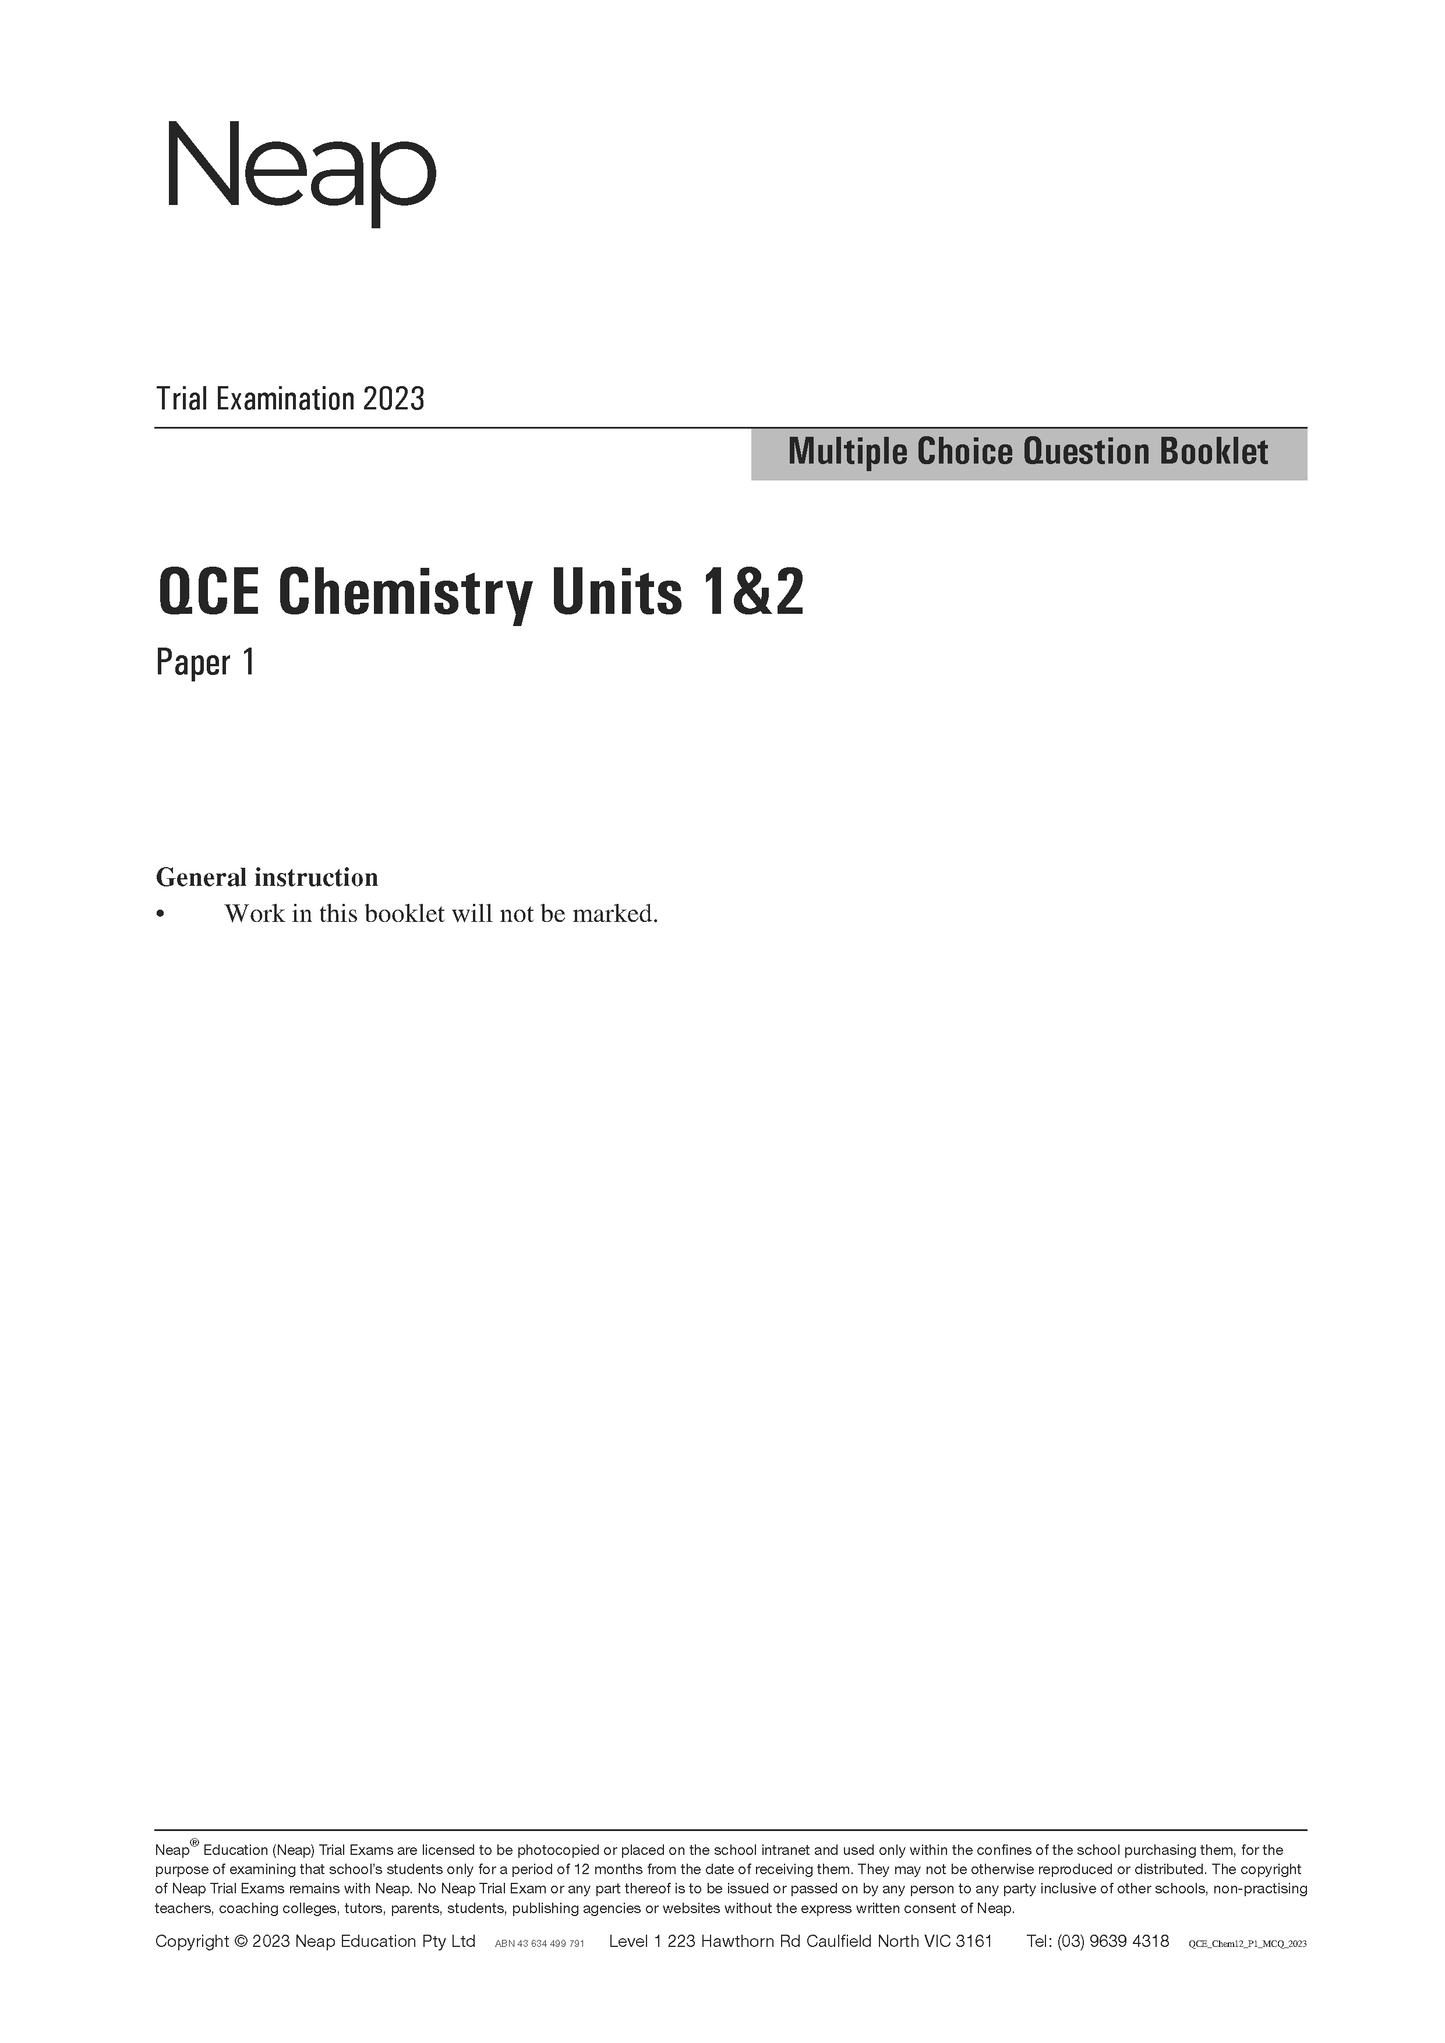 Neap Trial Exam: 2023 QCE Chemistry Units 1&2 (Papers 1 and 2)